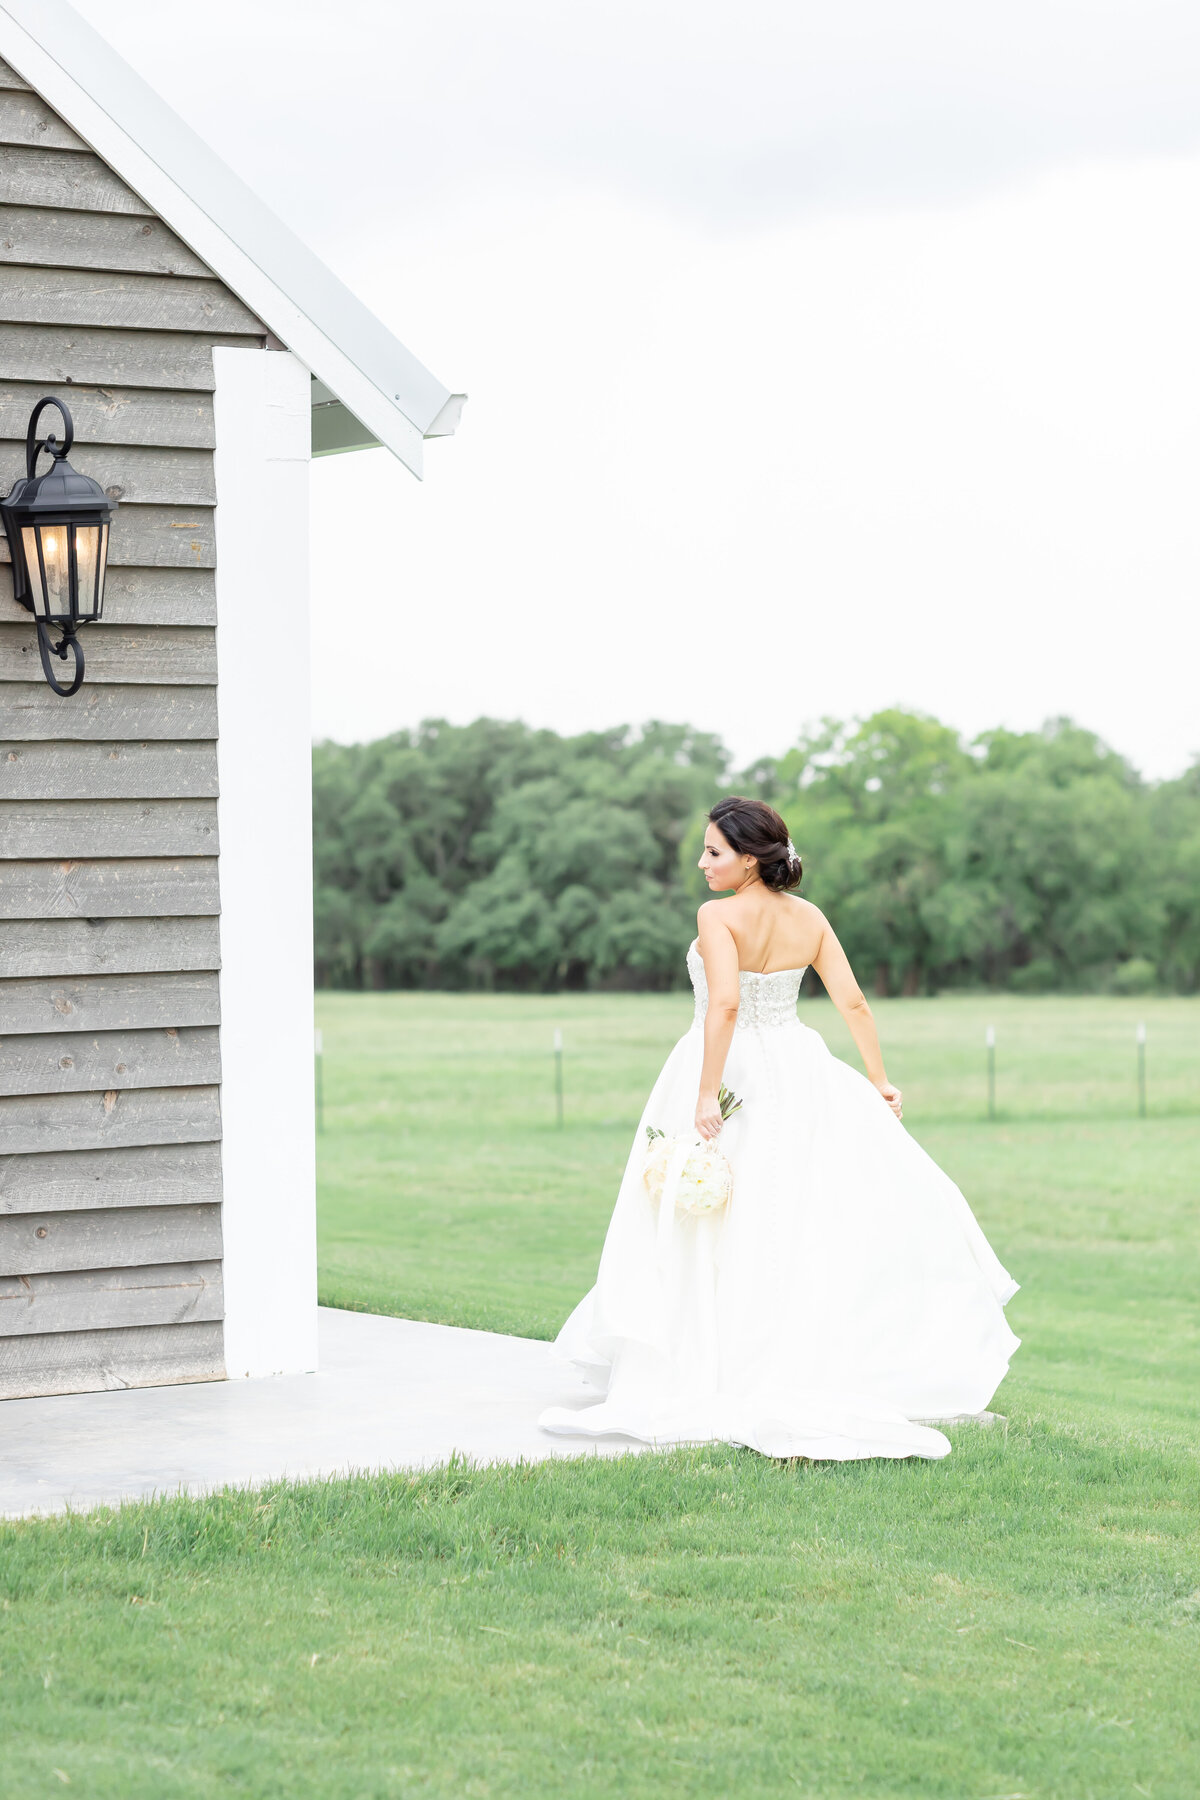 Wendee+Justin_Featherstone-Ranch_HannahCharisPhotography-171350